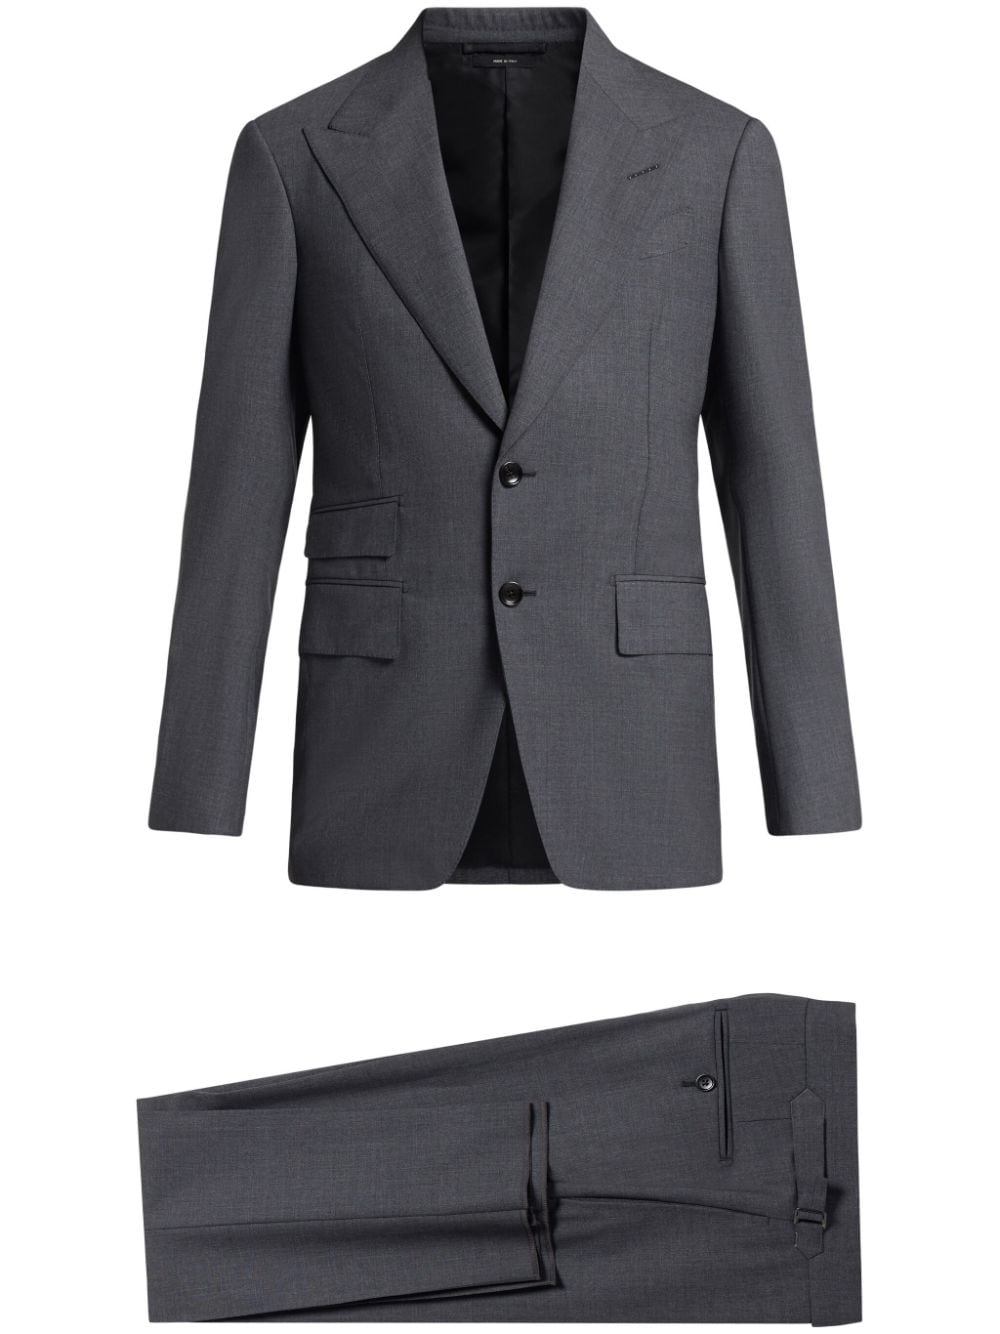 TOM FORD single-breasted straight-leg suit - Grey von TOM FORD